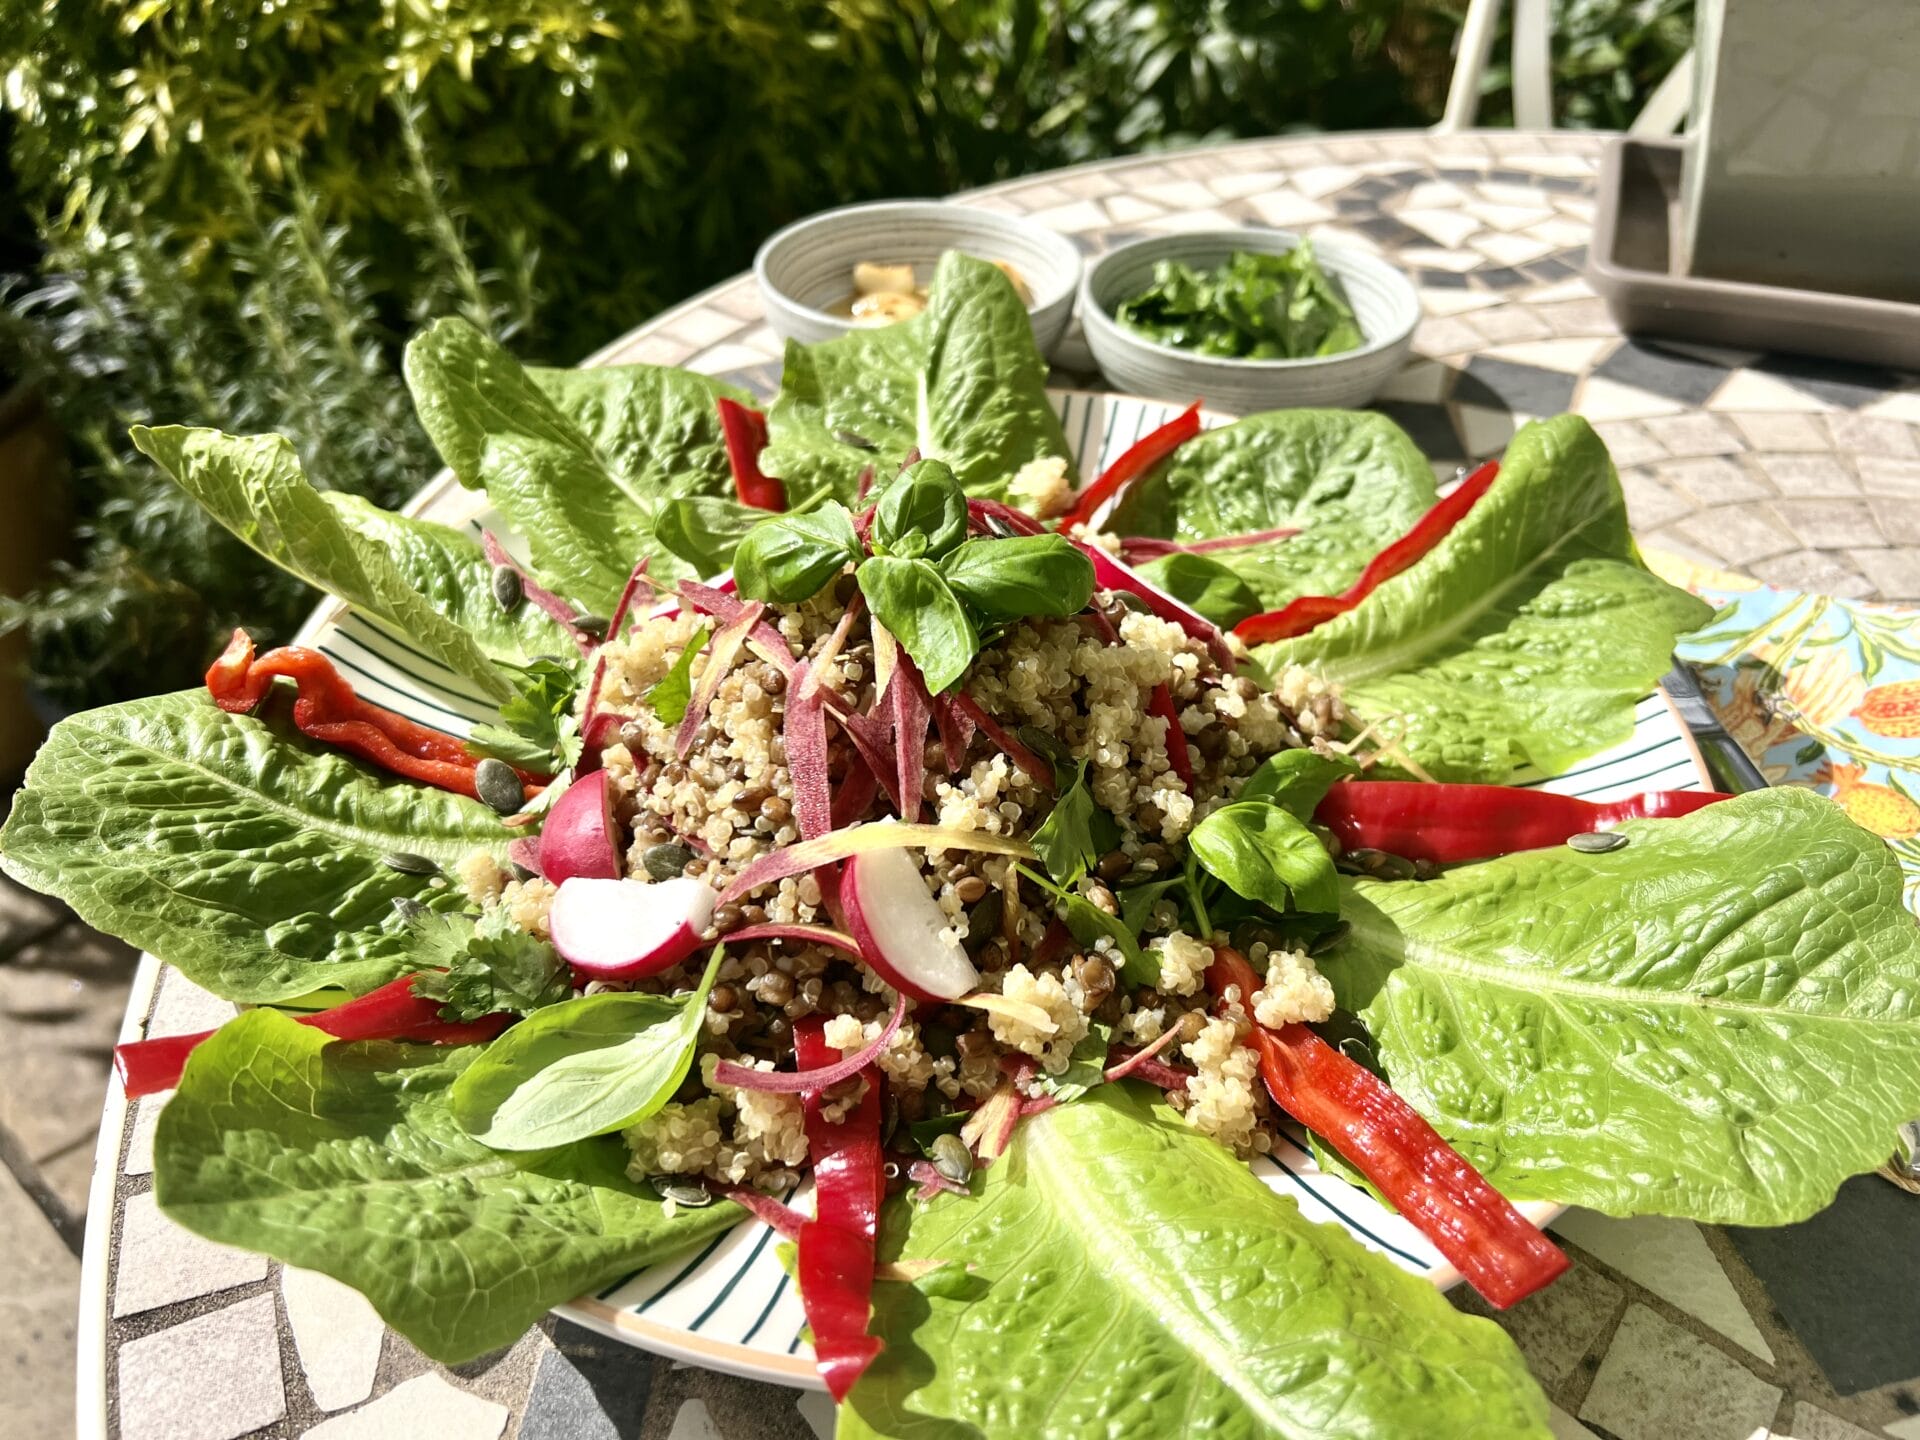 A plate of salad on a table outside.